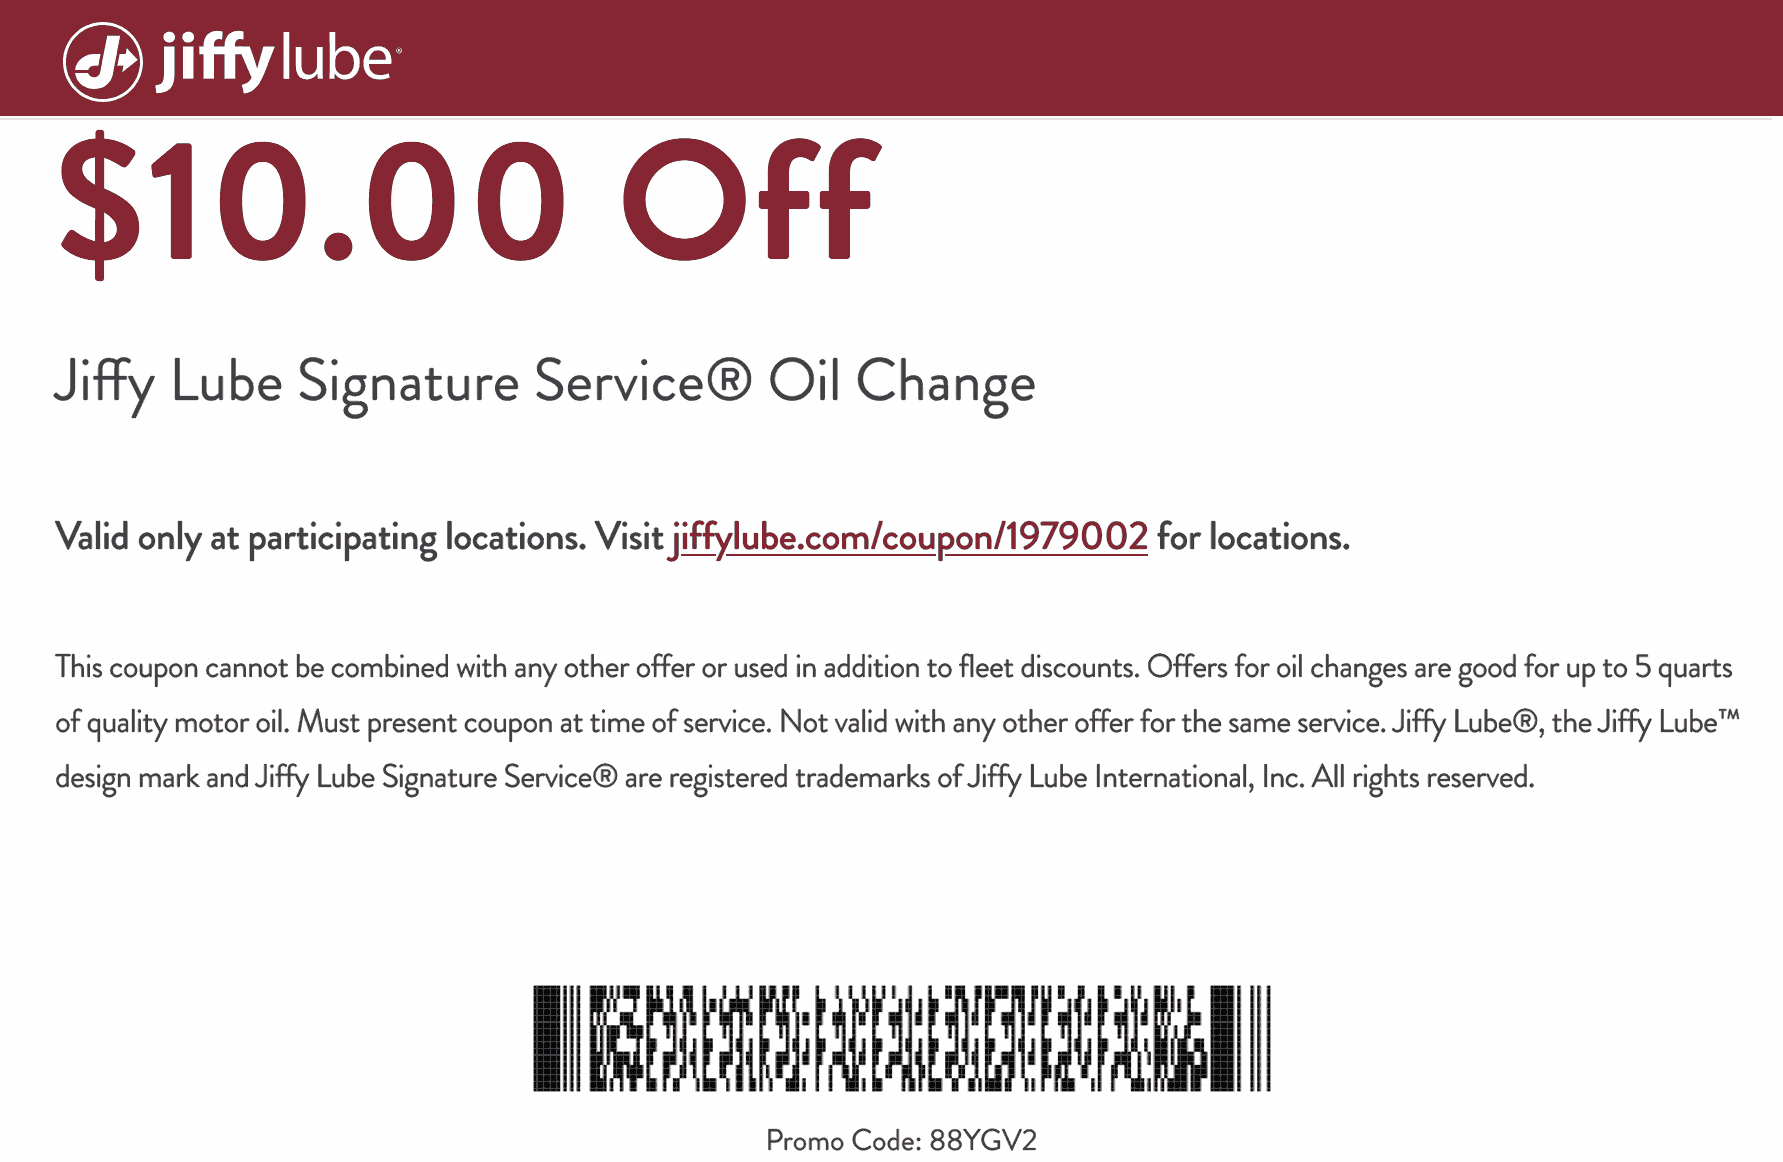 Jiffy Lube stores Coupon  $10 off an oil change at Jiffy Lube #jiffylube 